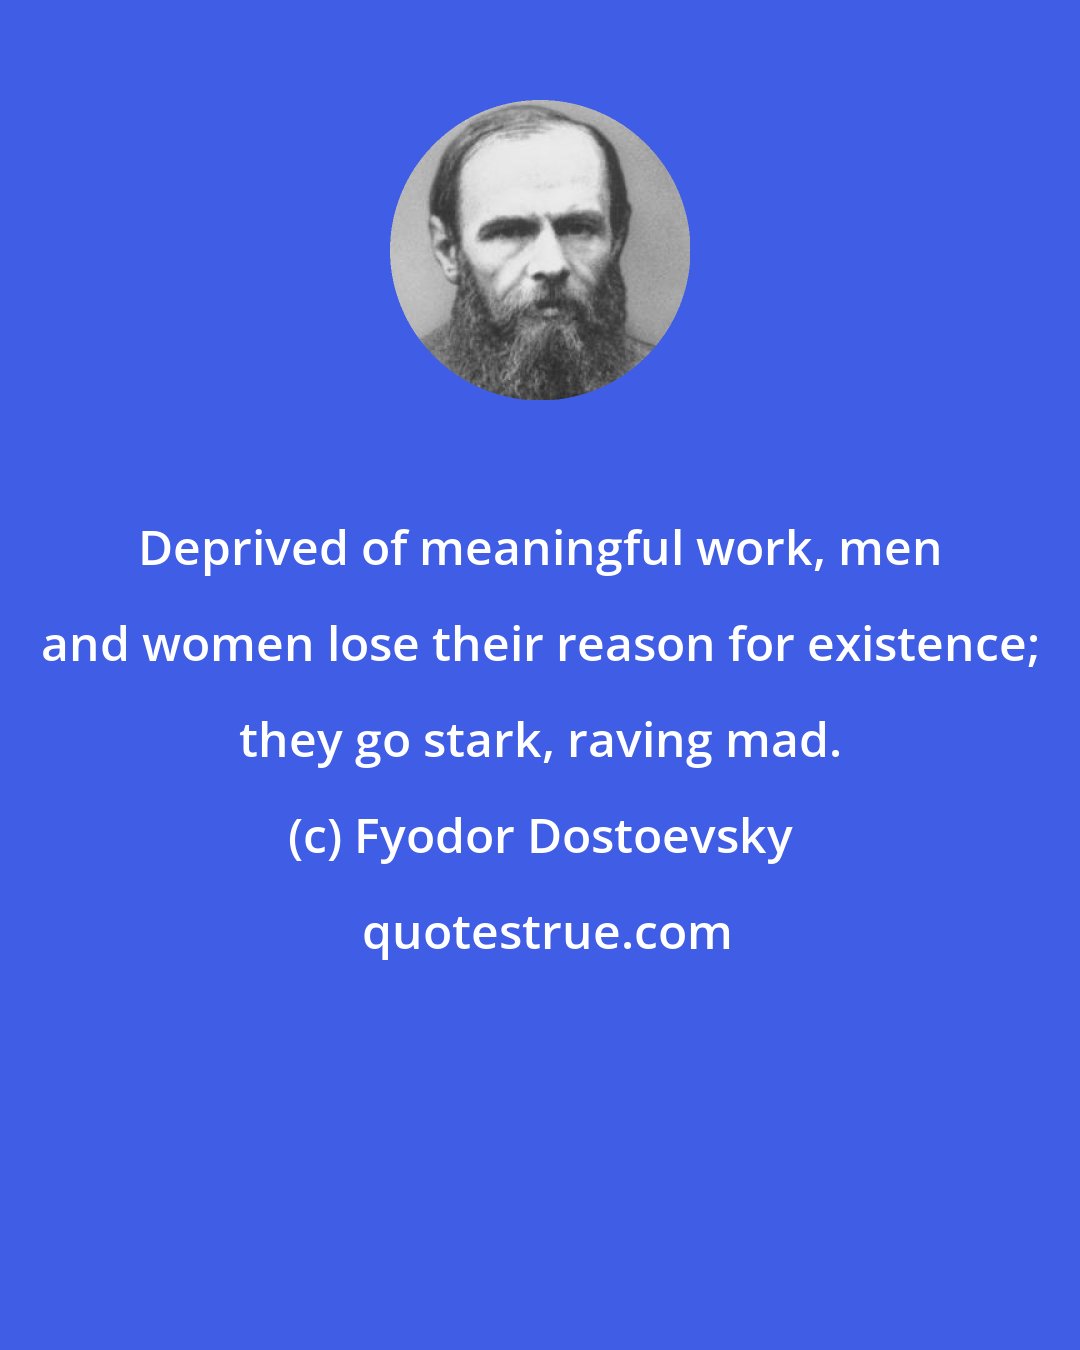 Fyodor Dostoevsky: Deprived of meaningful work, men and women lose their reason for existence; they go stark, raving mad.